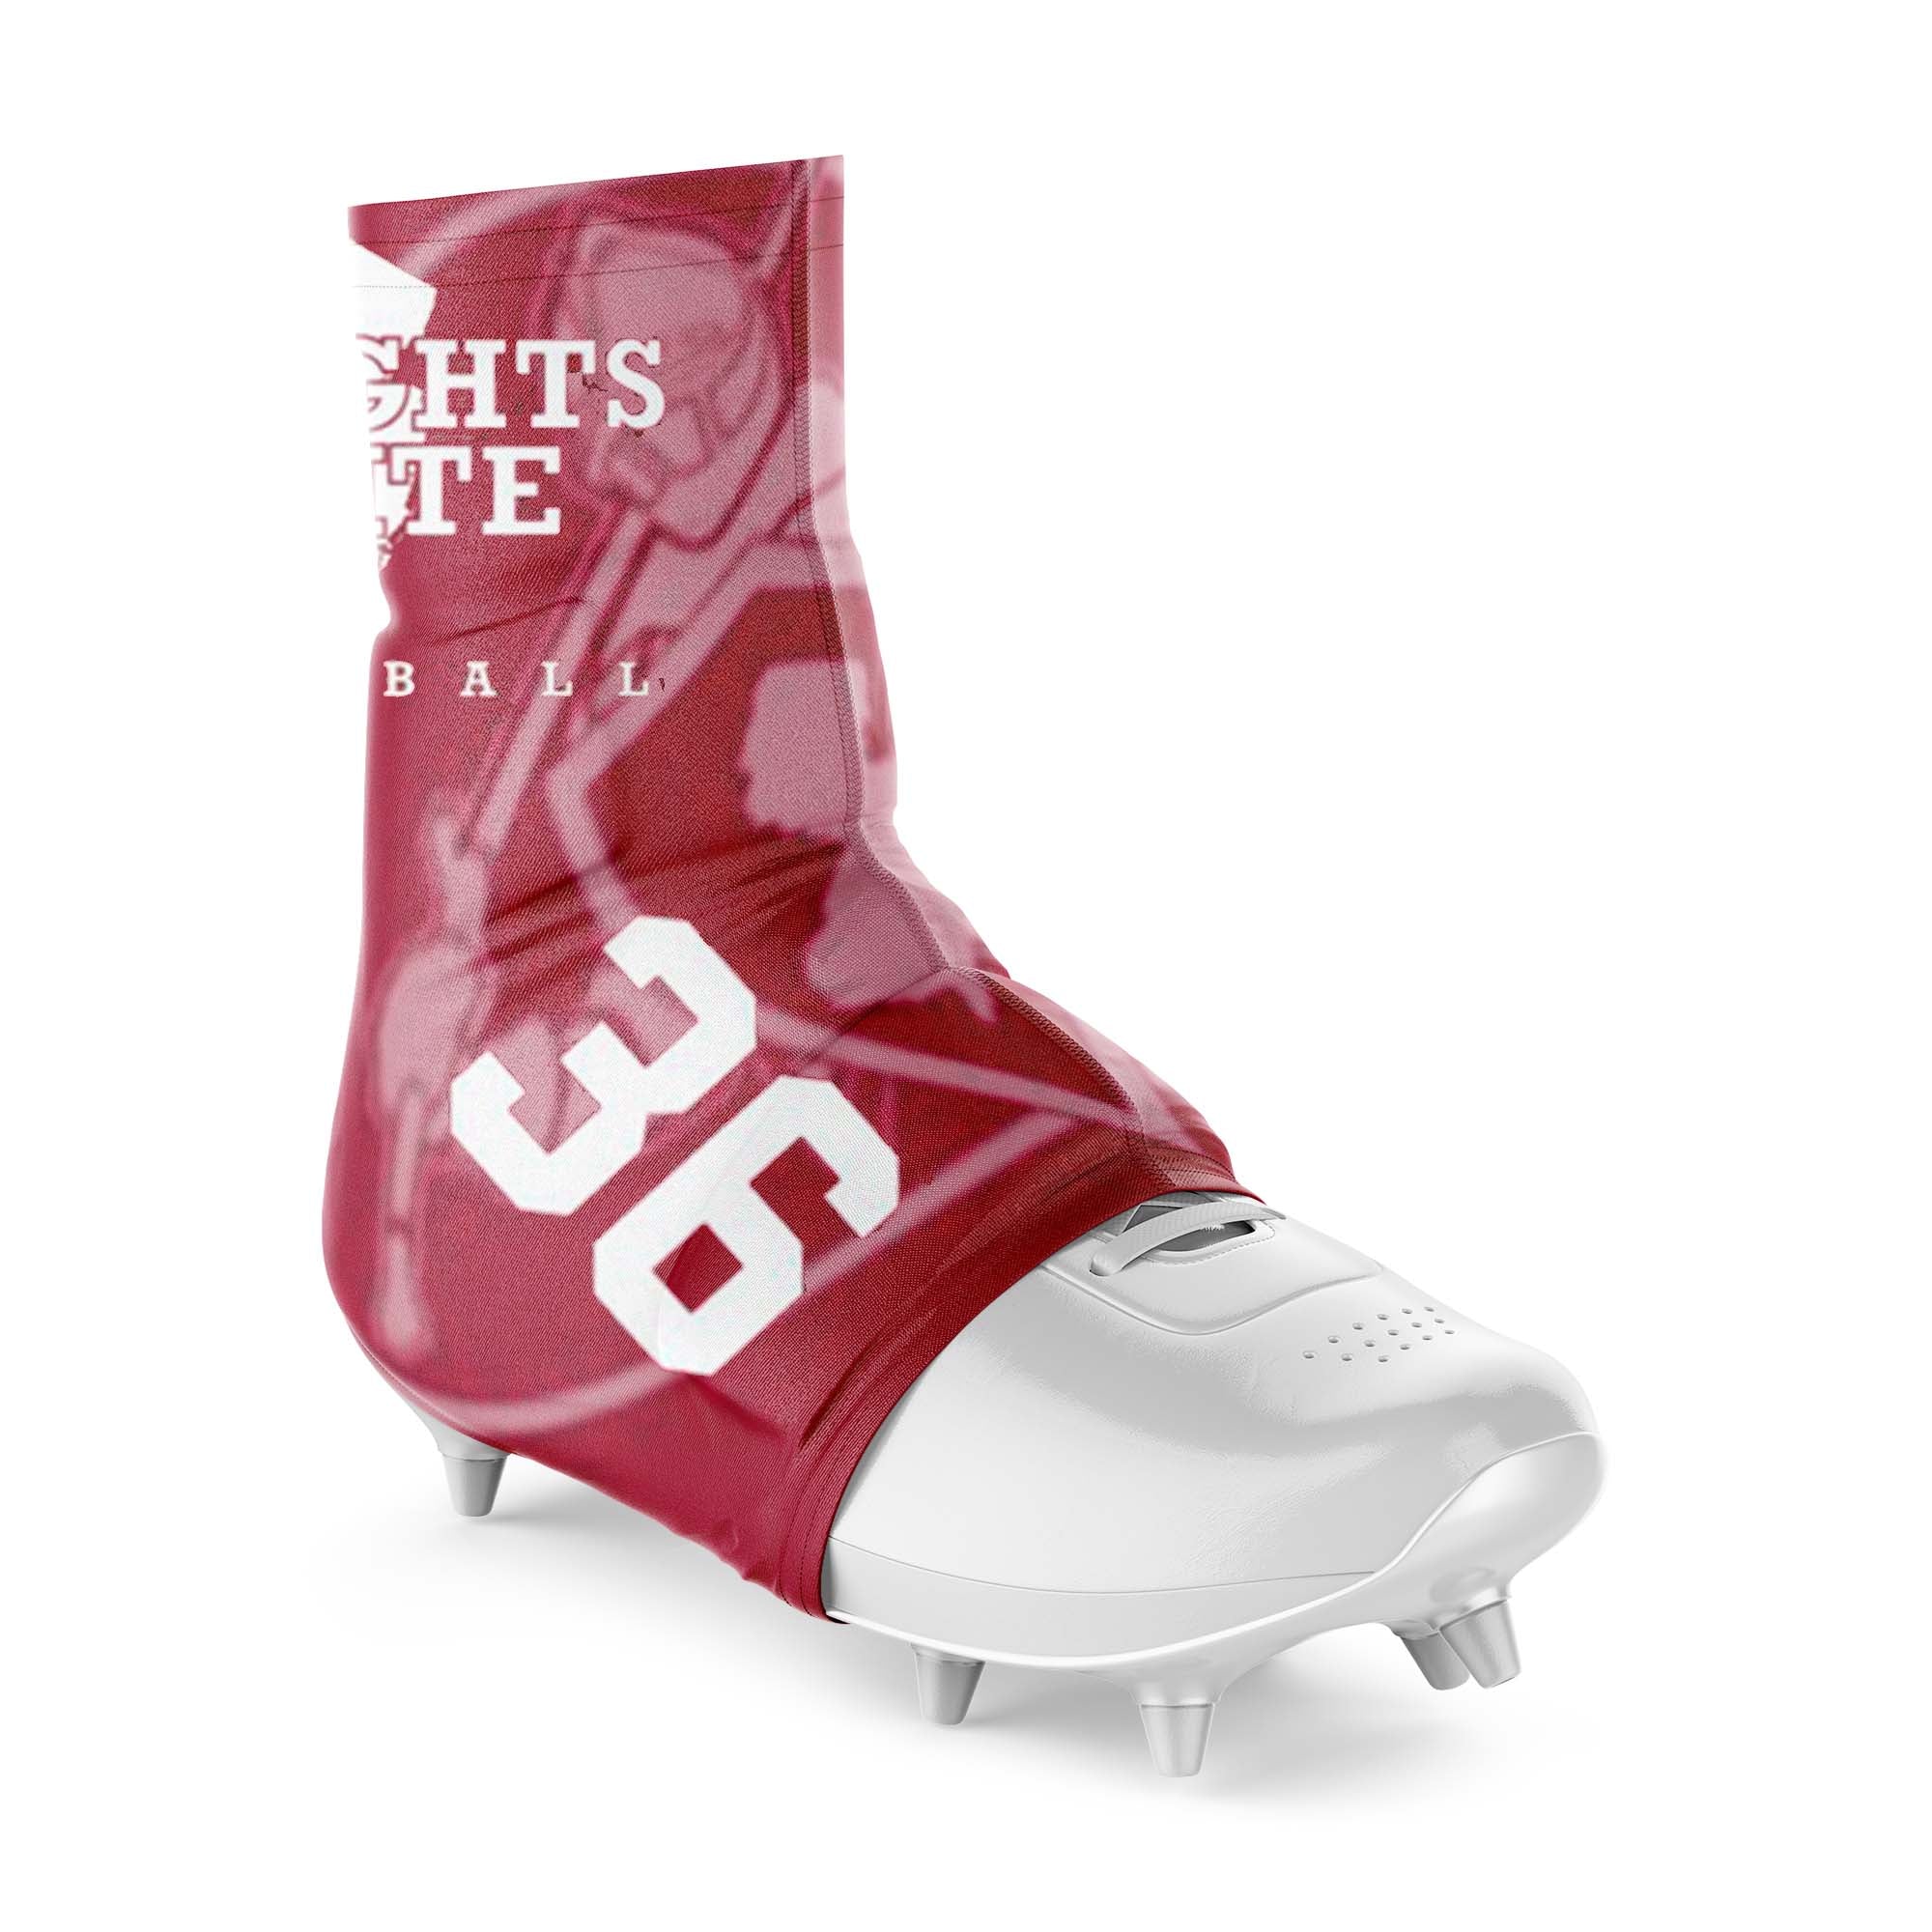 KNIGHTS ELITE Football Sublimated Spats